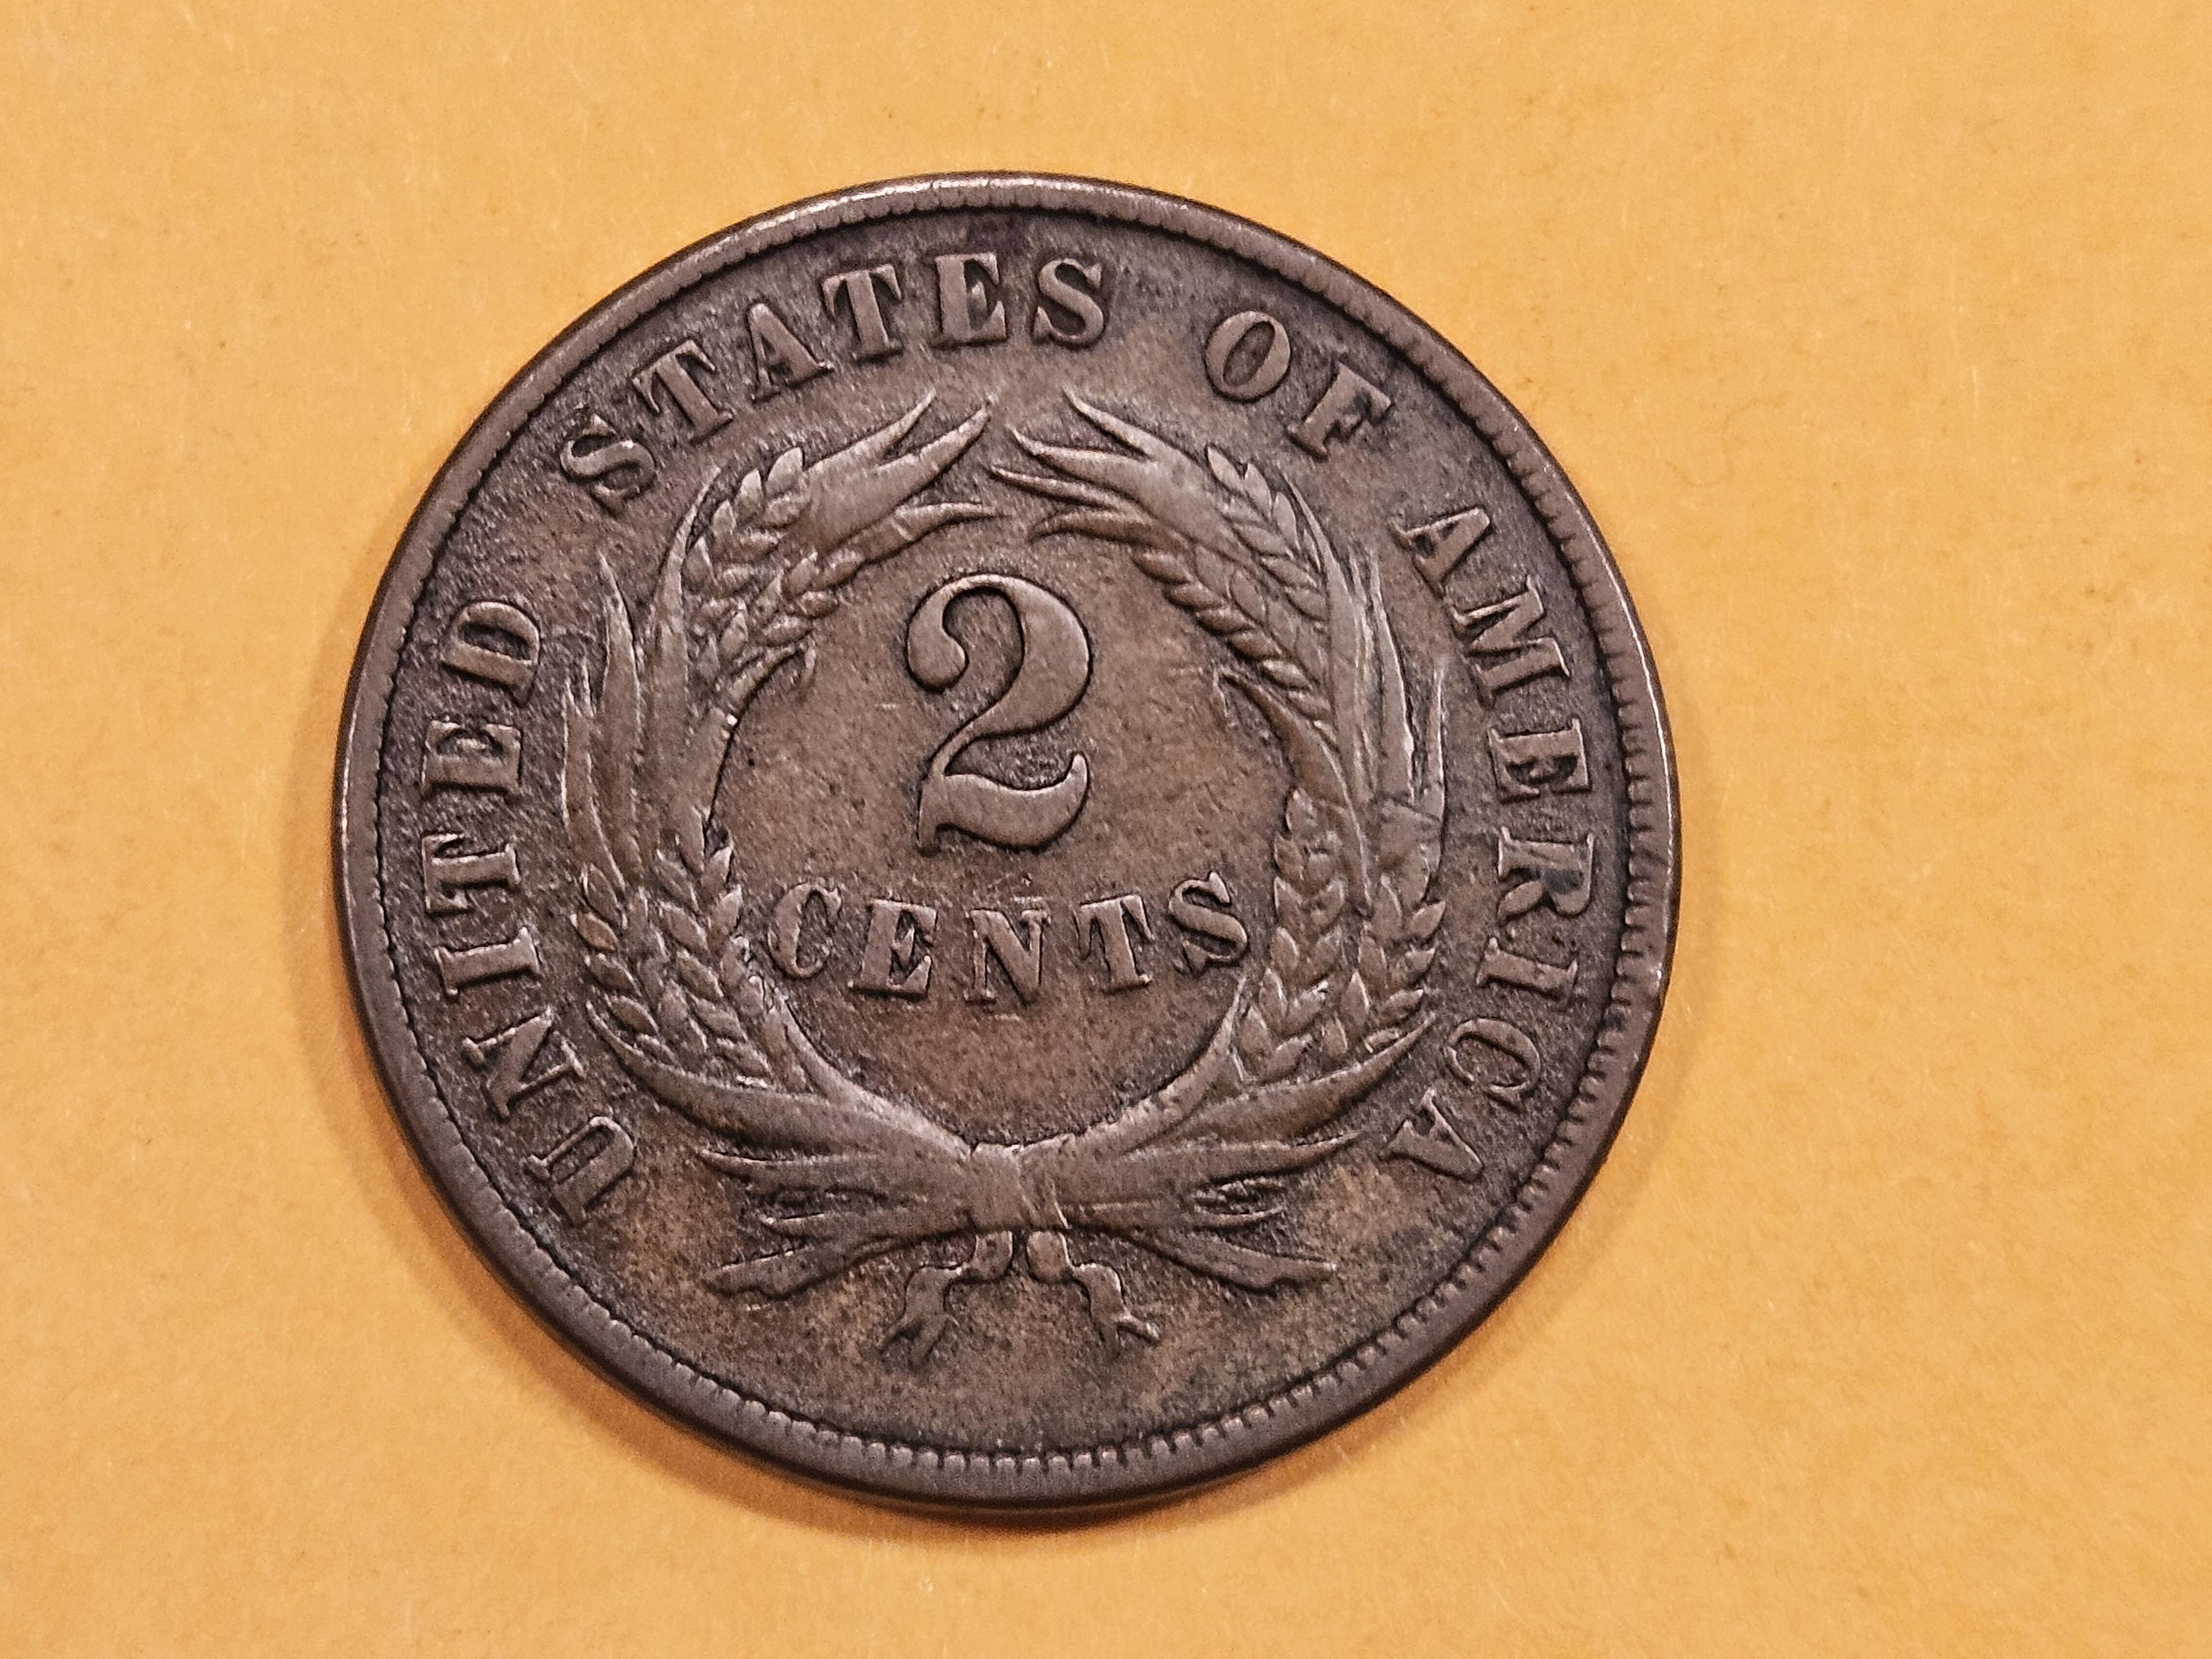 Better 1870 Two Cent piece